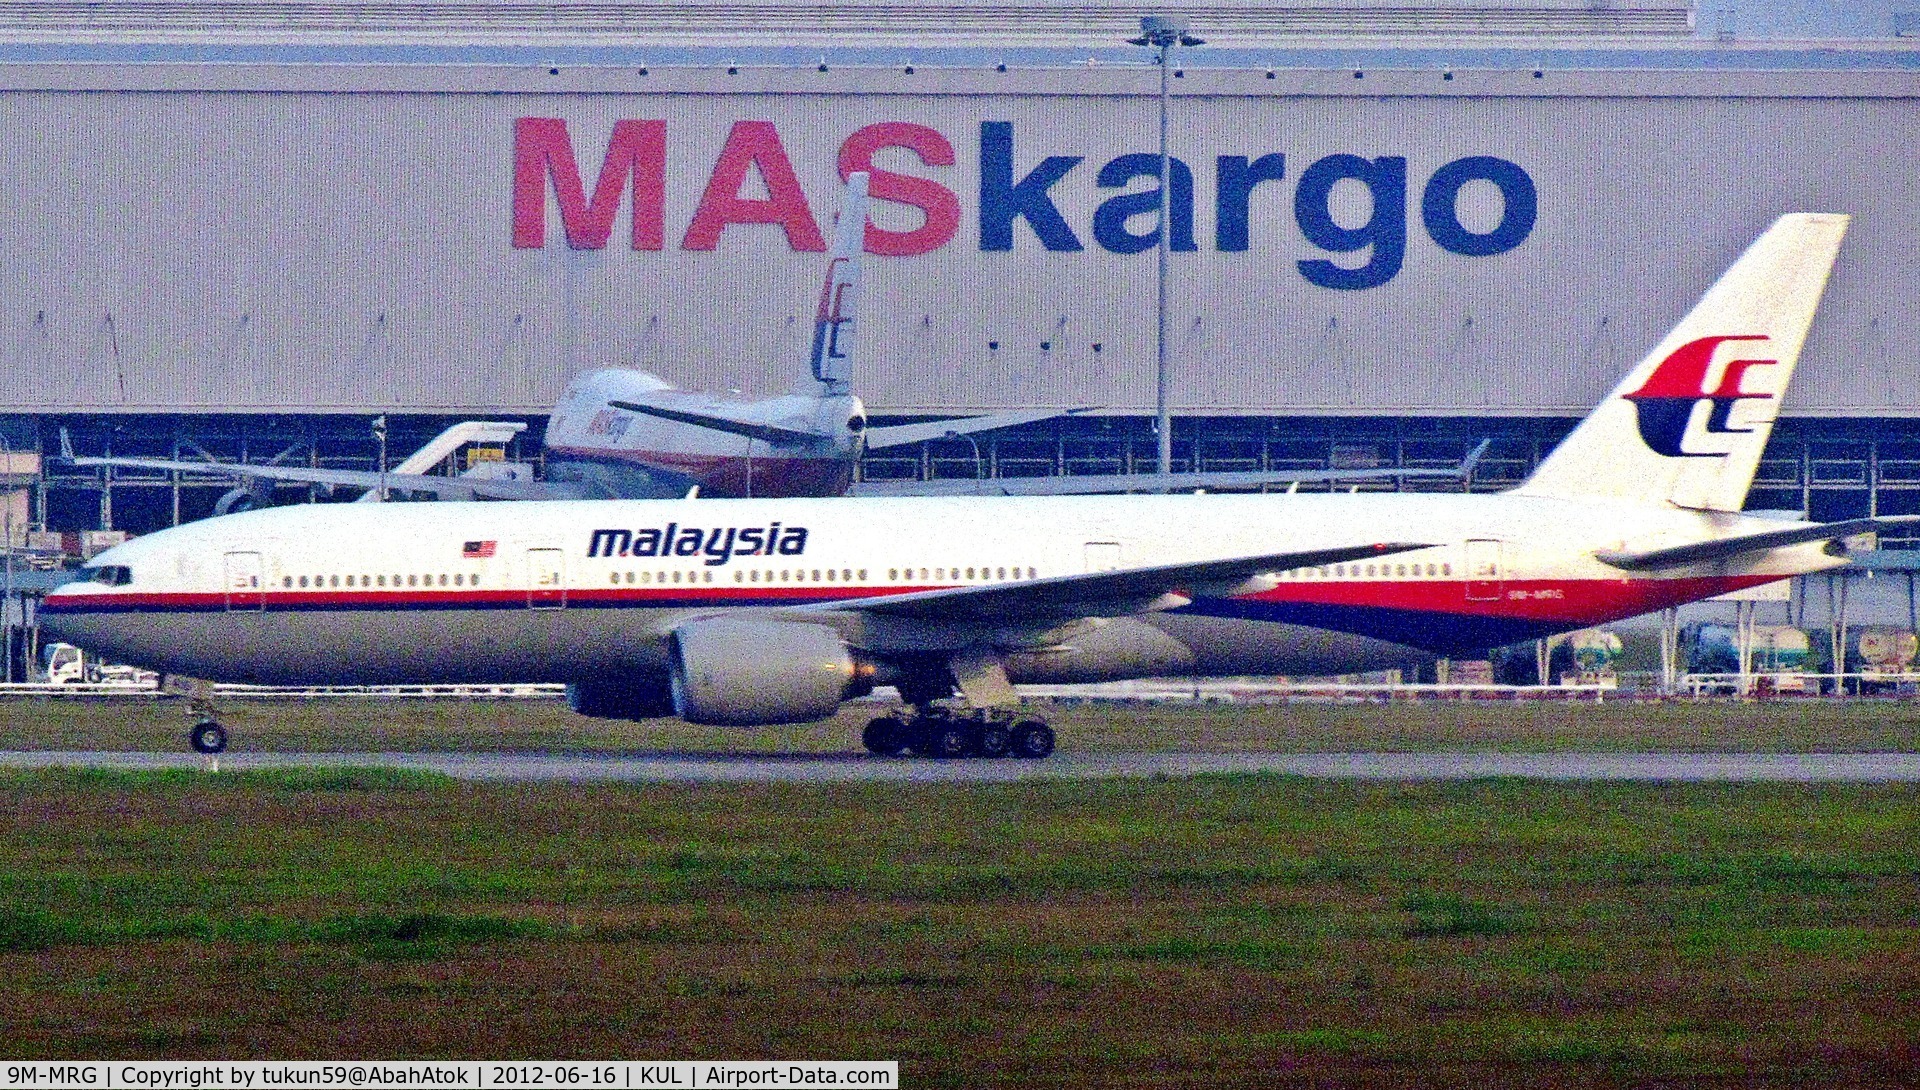 9M-MRG, 1998 Boeing 777-2H6/ER C/N 28414, Malaysia Airlines